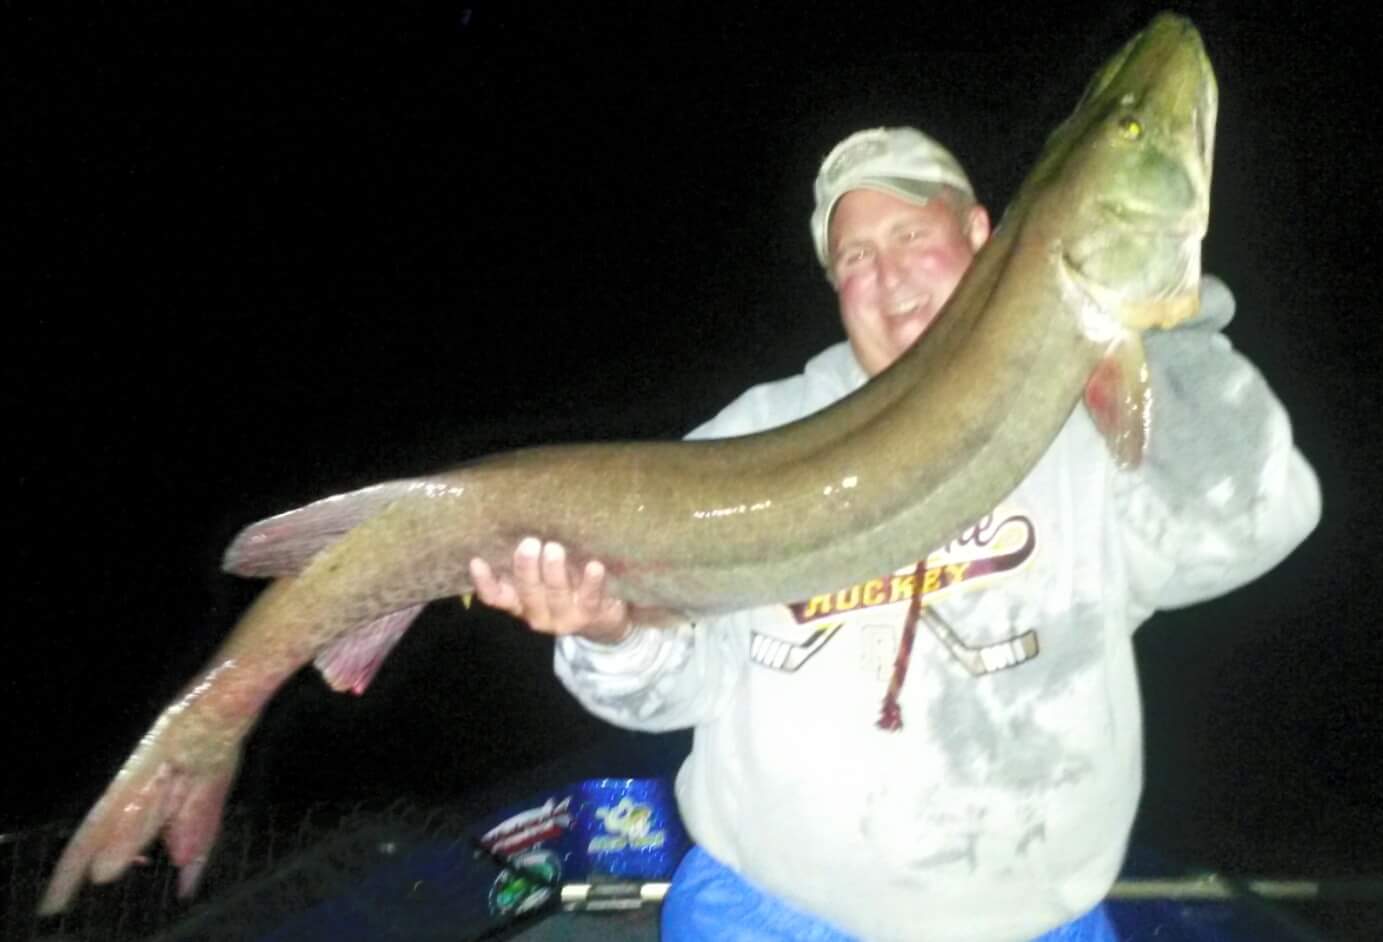 Guy smiling holding up a 55 inch muskie at night